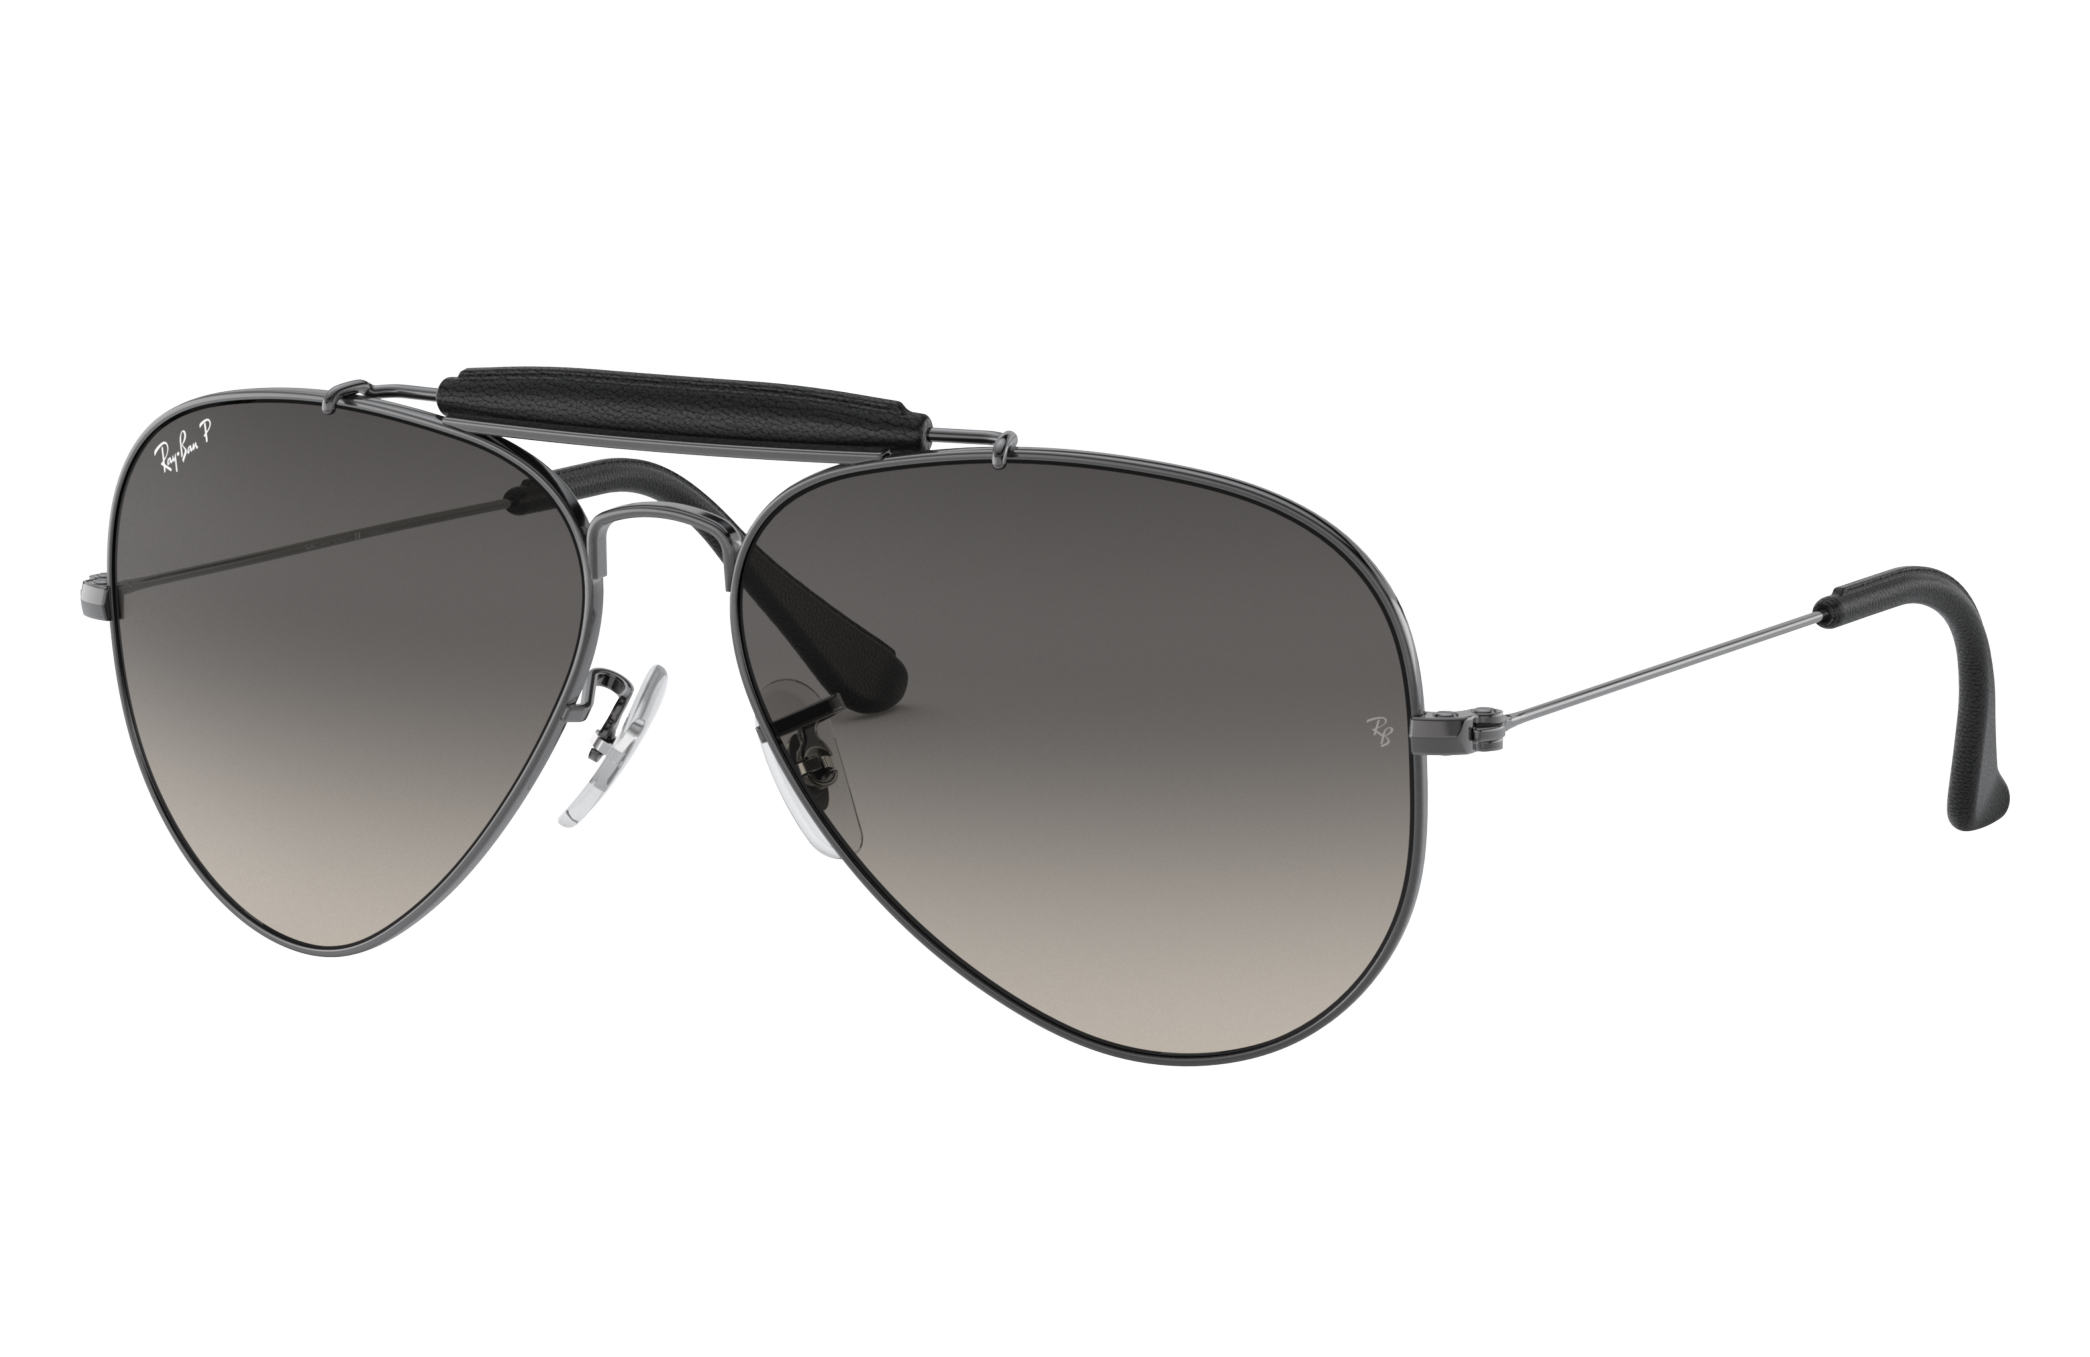 Aviator Craft @collection Sunglasses in Gunmetal and Grey - RB3422Q ...